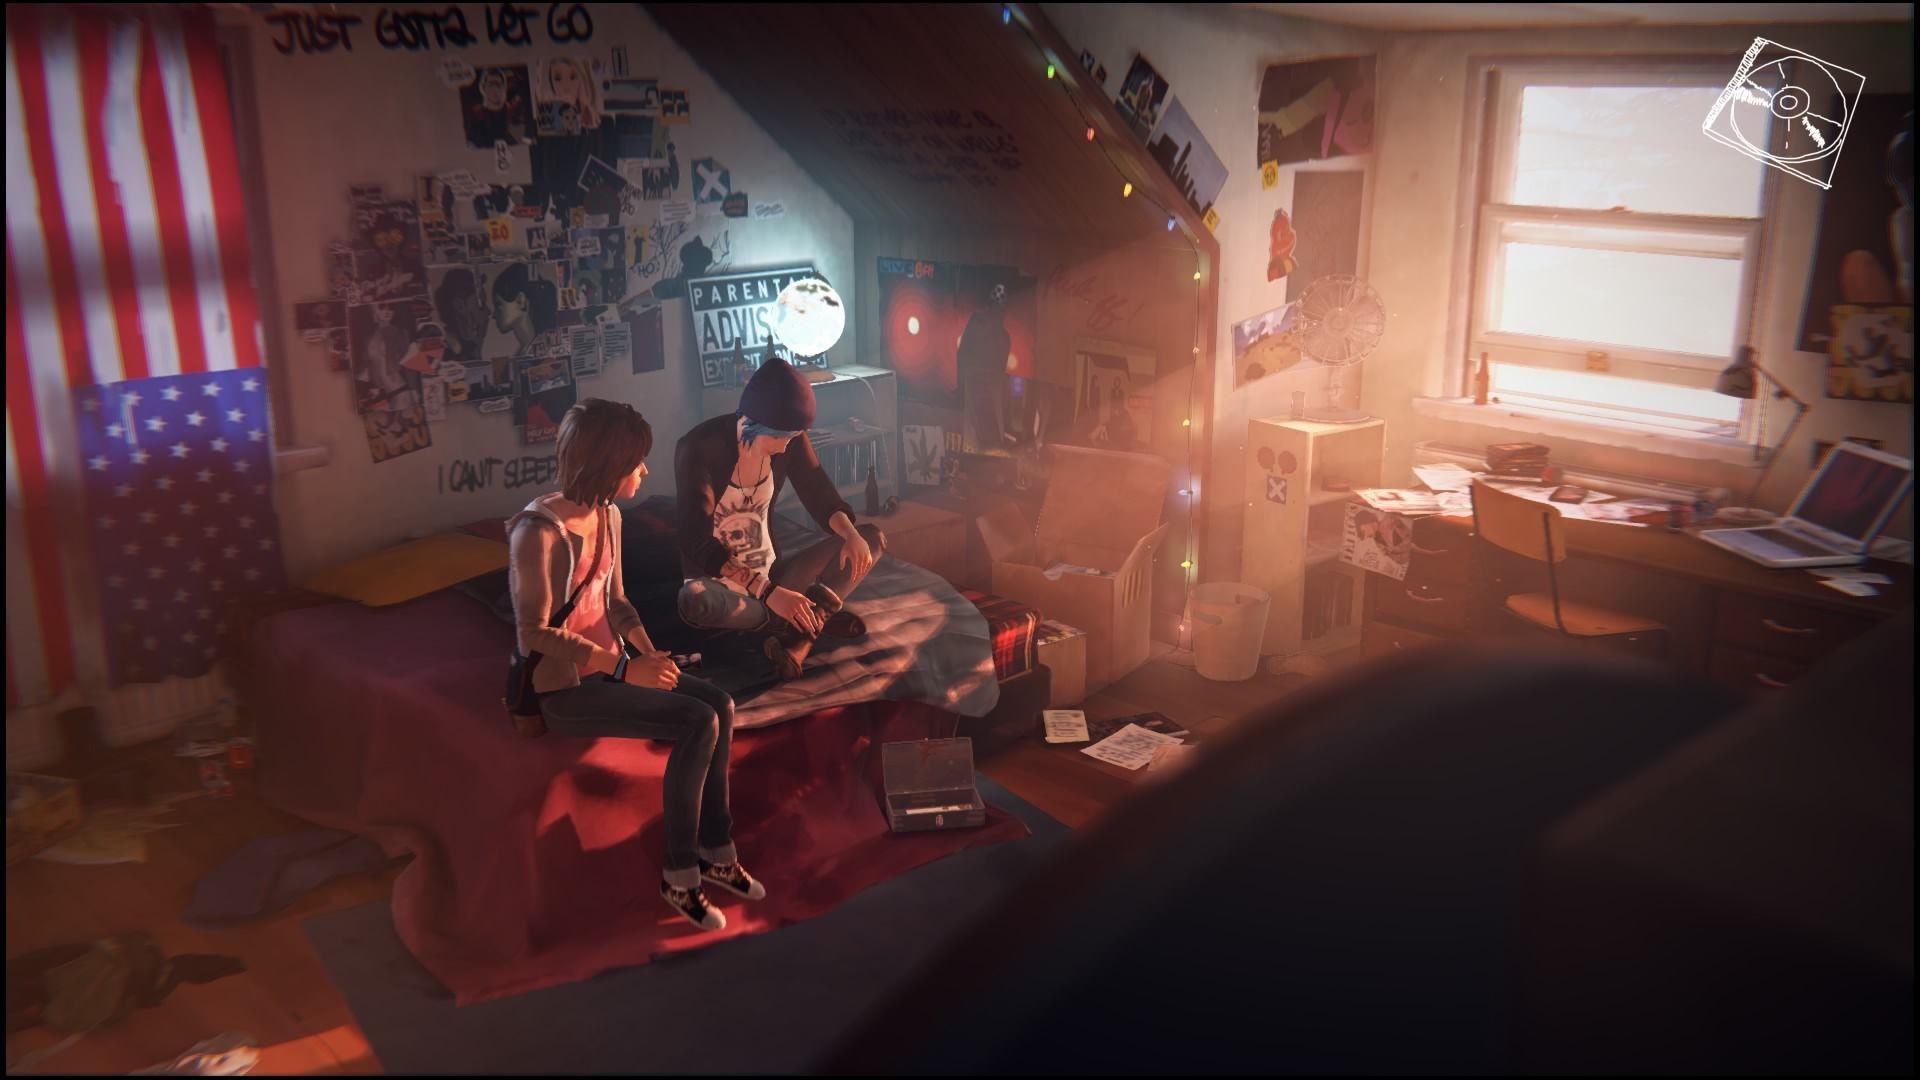 Life Is Strange Remastered Collection Release Date (Game US UK Release)